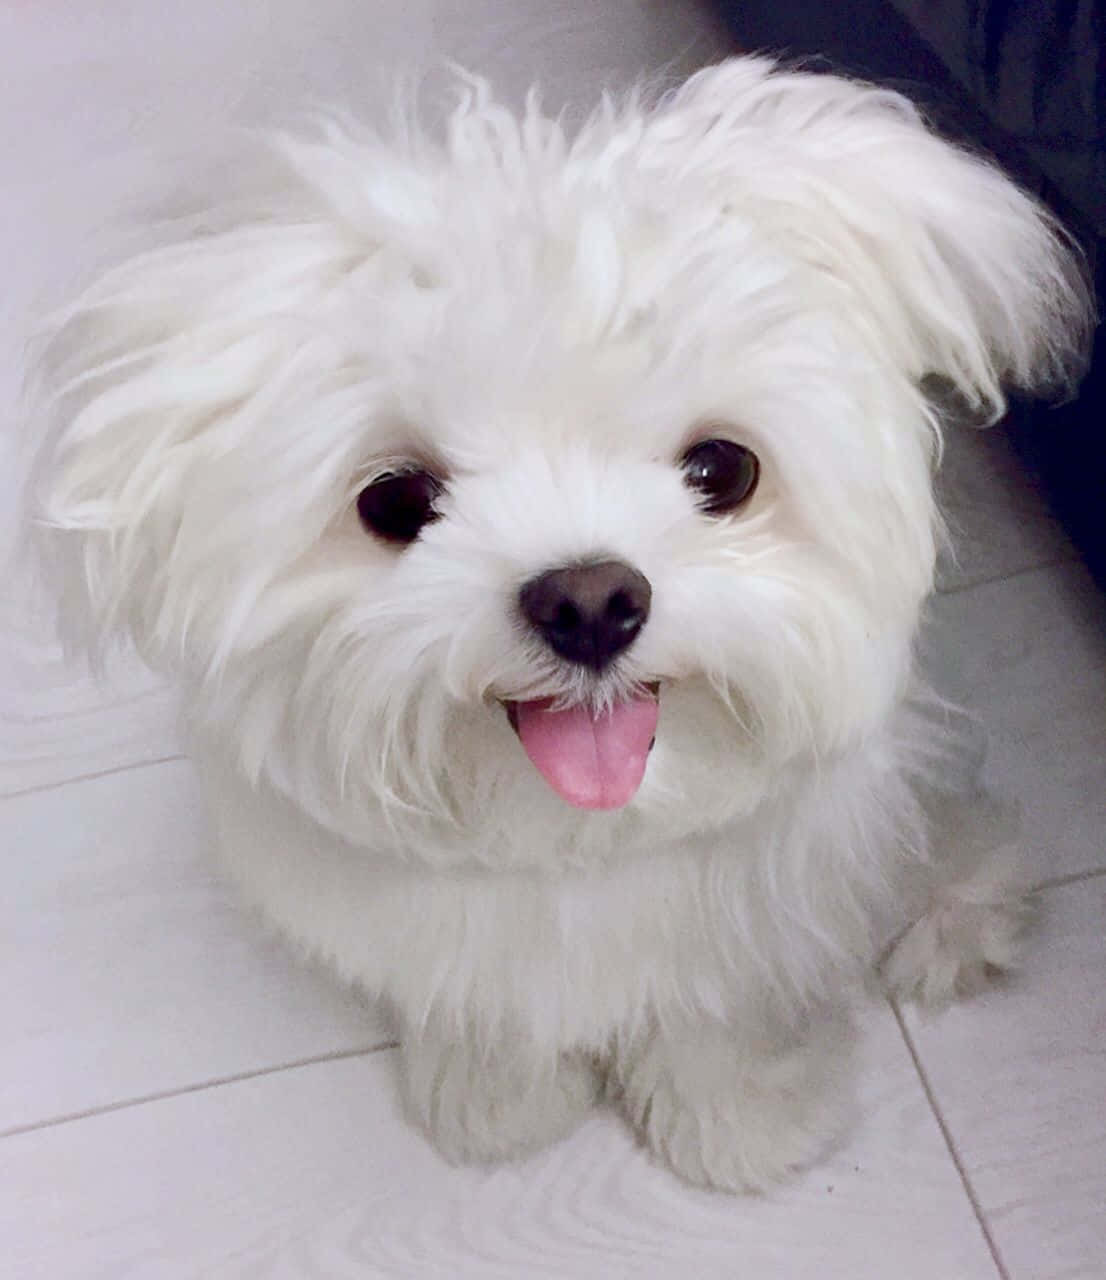 A White Dog Is Sitting On The Floor With Its Tongue Out